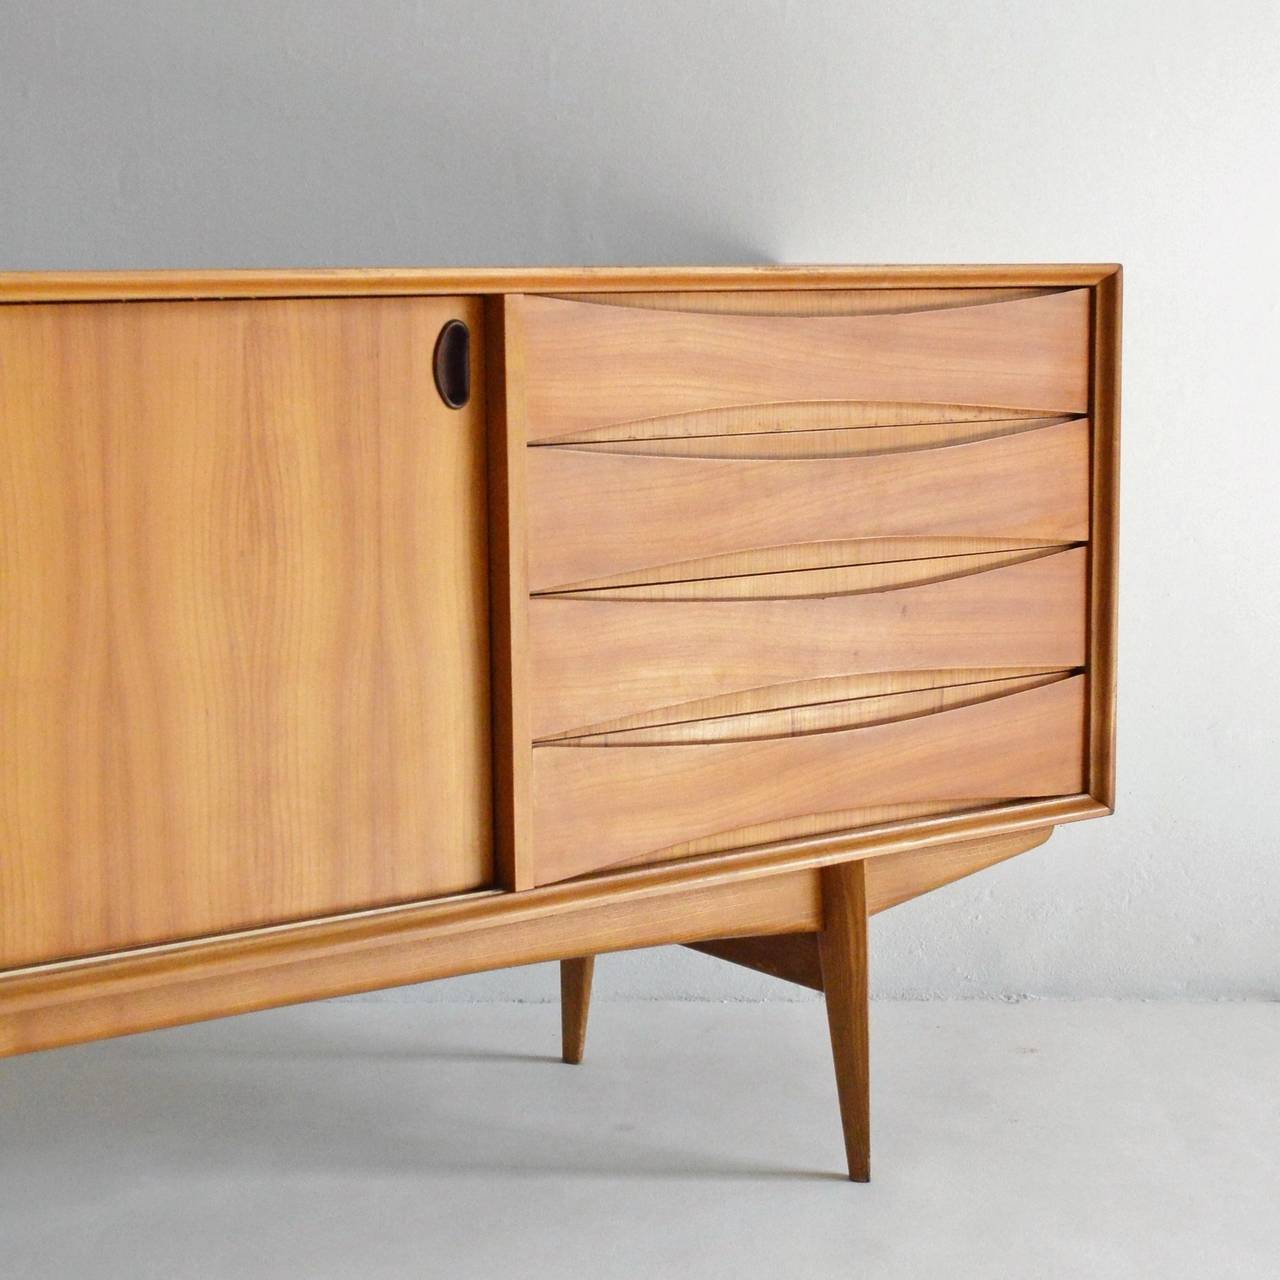 'Paola' cherry wood sideboard by Oswald Vermeacke for Belgian manufacturer, V-Form. A High quality piece with an obvious danish influence. It has an unusual and striking cherry wood veneer with book matched top. Behind the sliding doors there is a